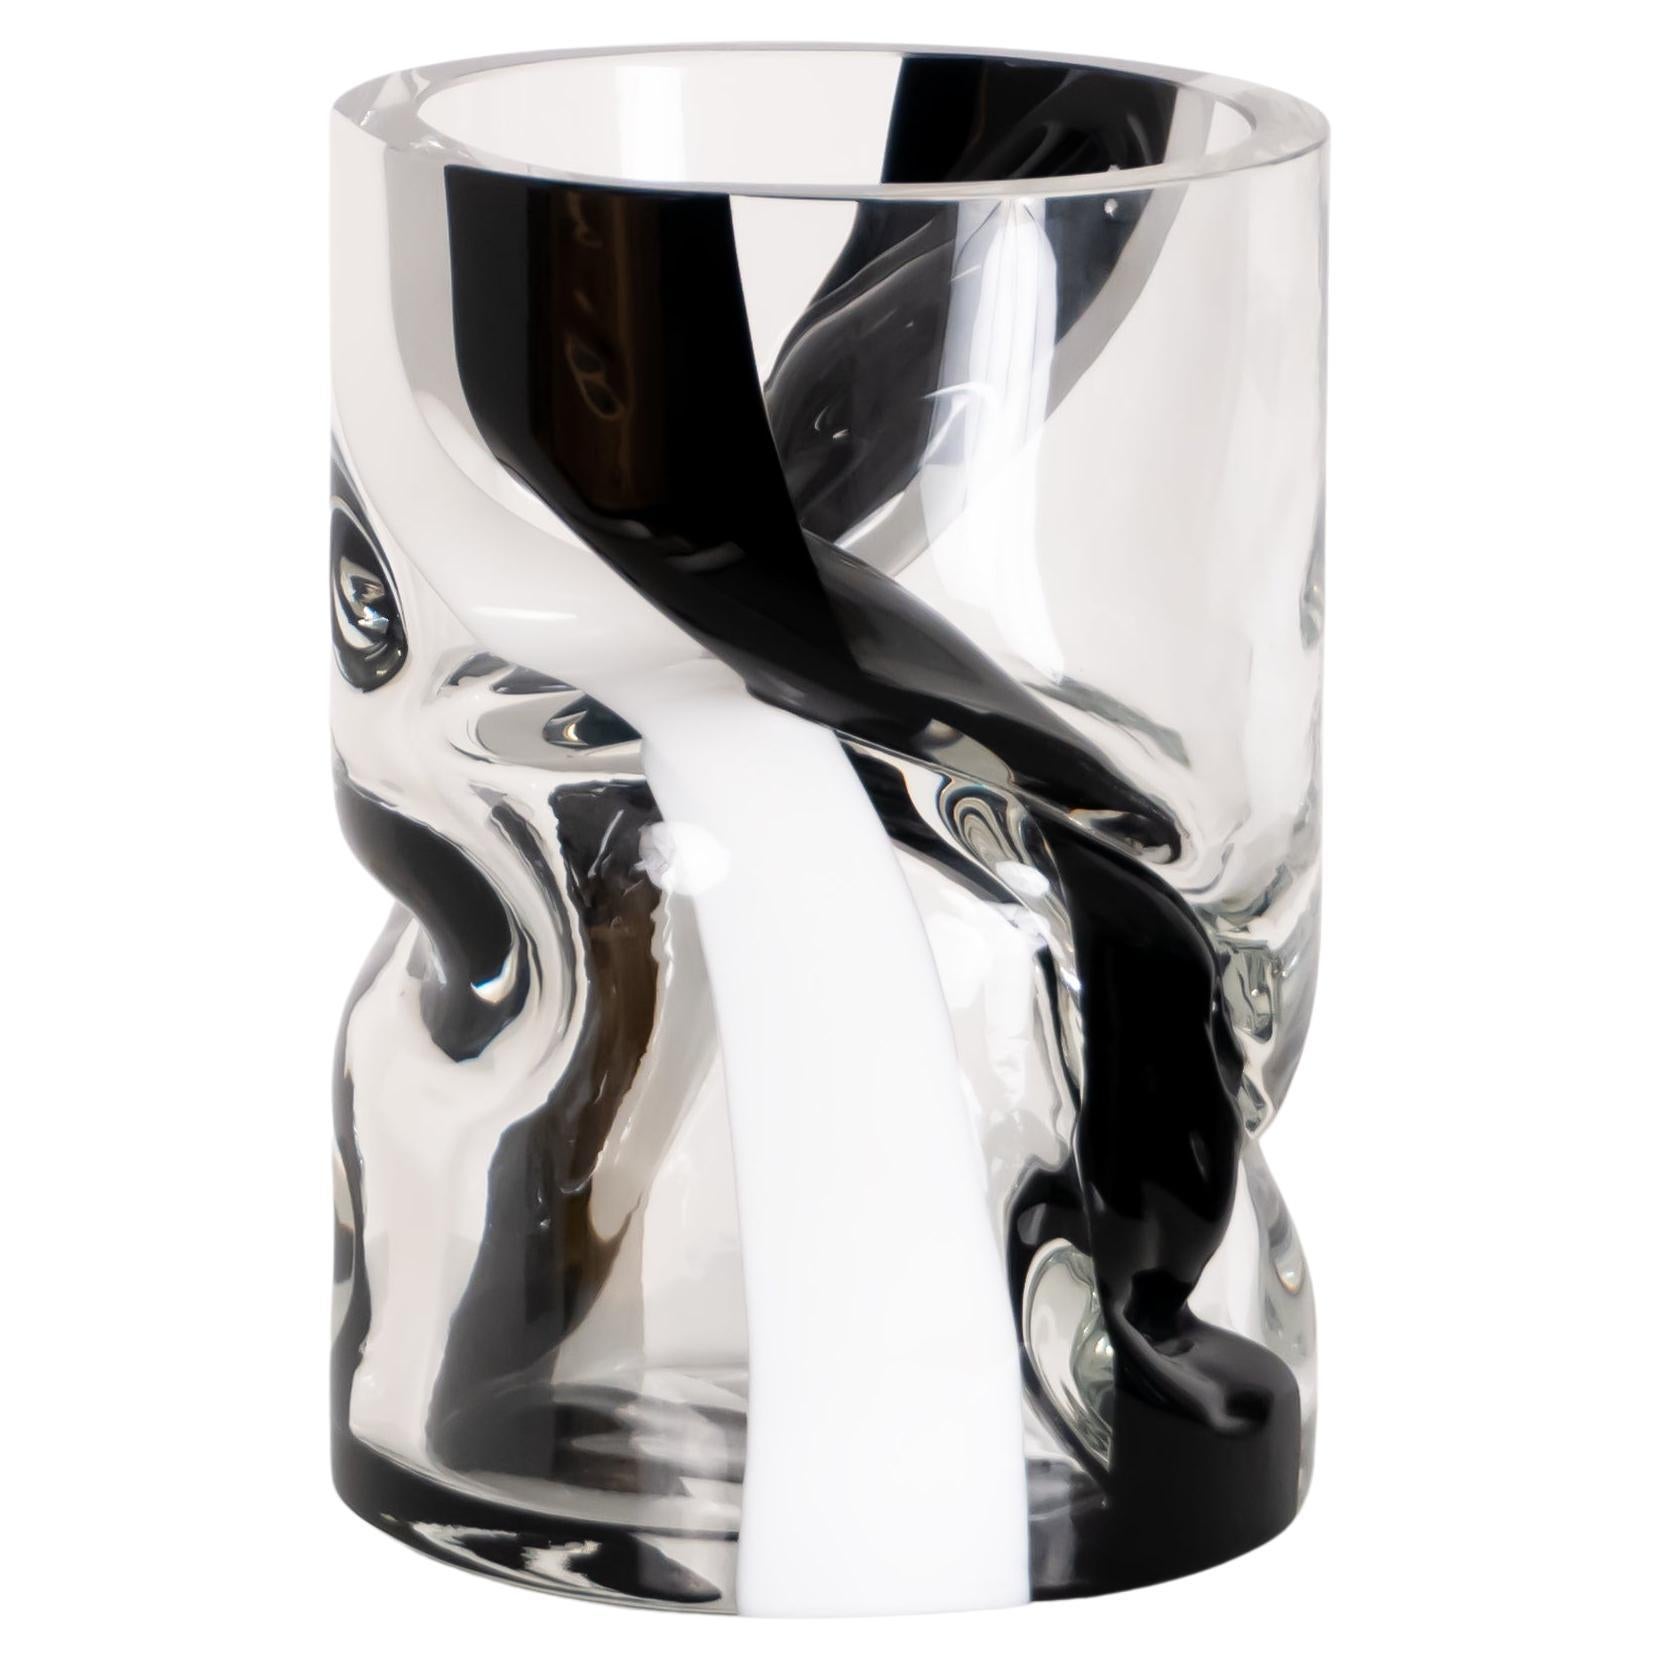 Our large striped Crushed vase features a bold black stripe on a clear glass vessel. During the glass blowing process, vases are twisted and shaped to create crushed forms within the confines of a simple geometric framework. Each piece is unique.